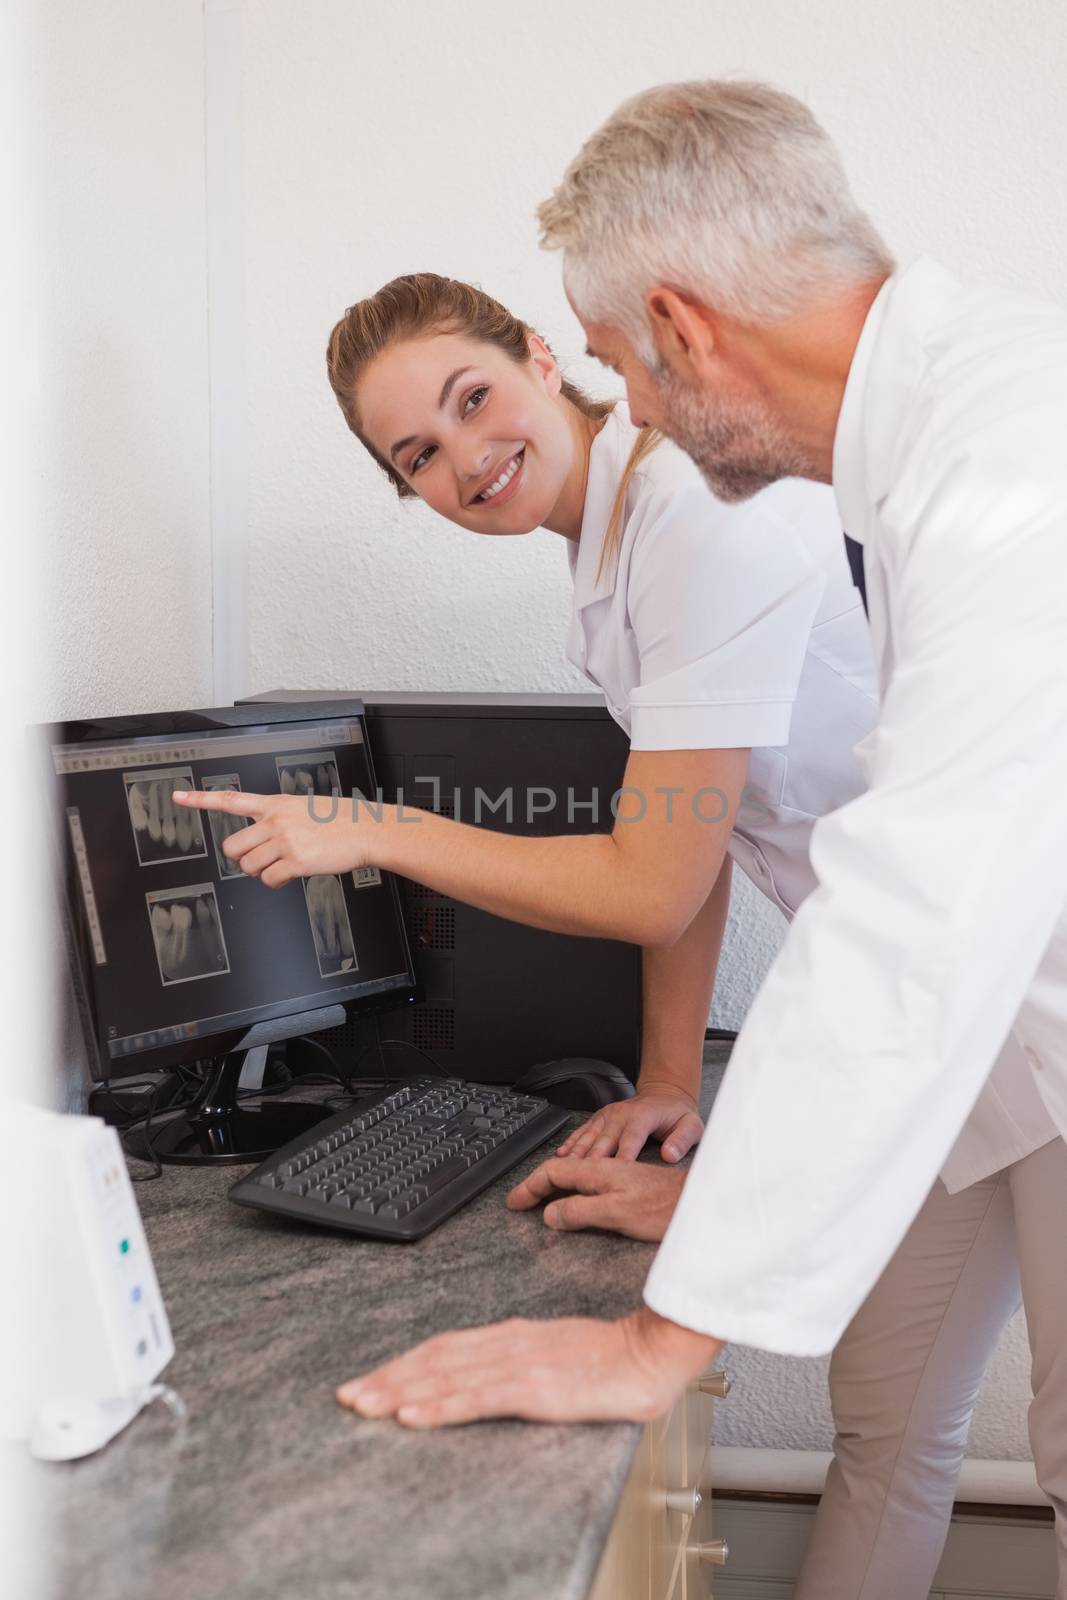 Dentist and assistant studying x-rays on computer by Wavebreakmedia